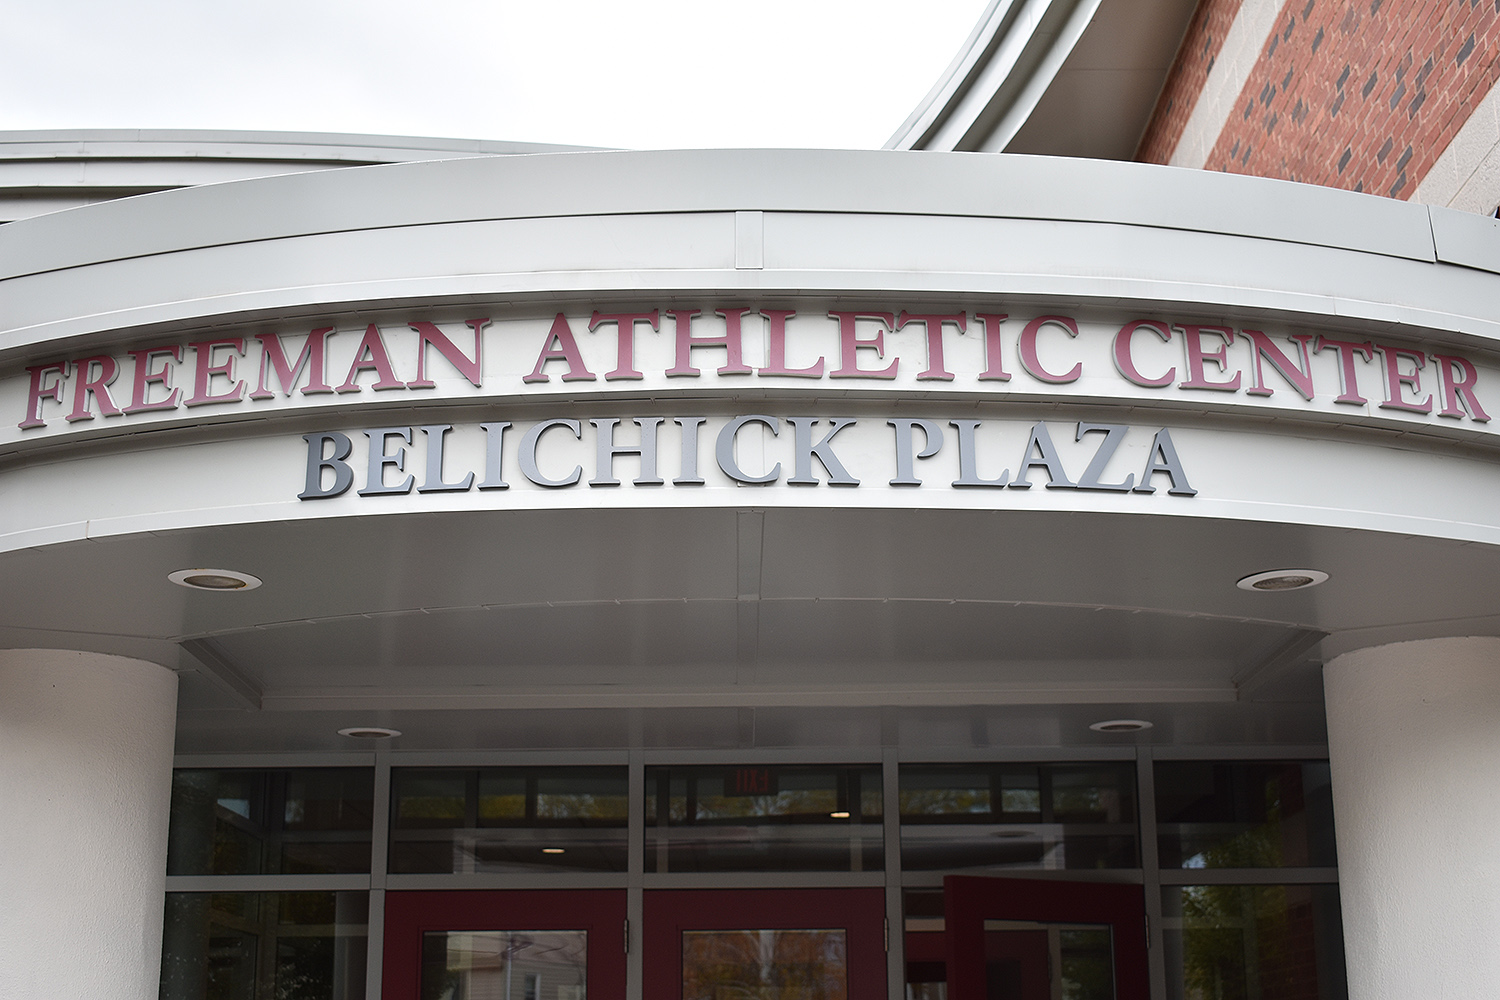 The Belichick Plaza, which houses Wesleyan's Athletics Hall of Fame, is located at the Warren Street entrance of the Freeman Athletic Center. Belichick himself was named to the Athletics Hall of Fame in 2008. 